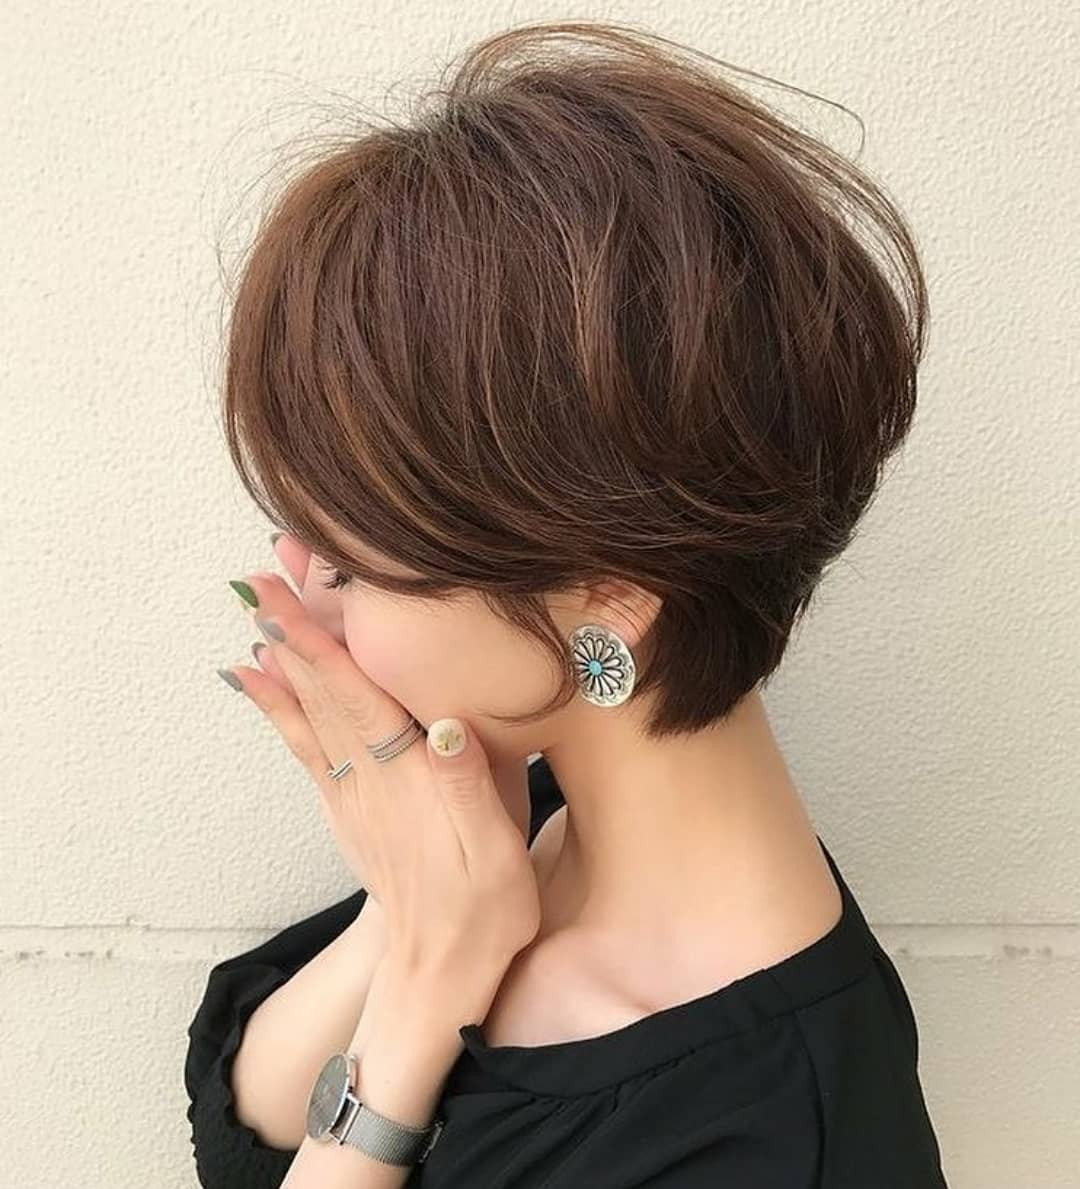 Short Haircuts For Little Girl 2020
 10 Cute Short Hairstyles and Haircuts for Young Girls